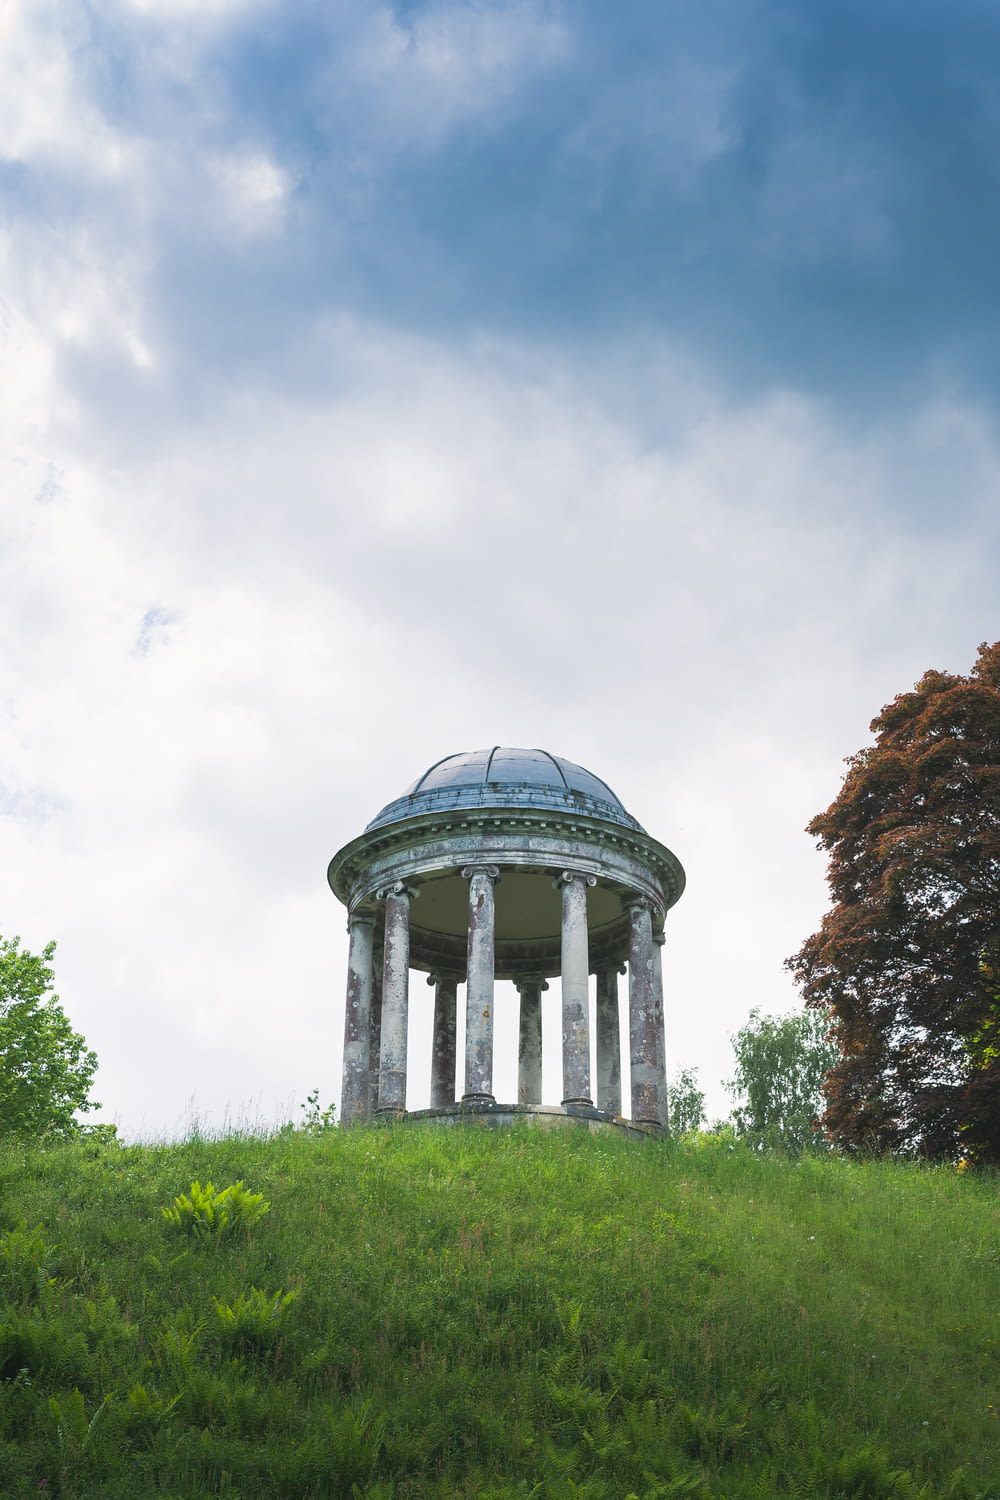 a round structure with columns and a dome on top of it